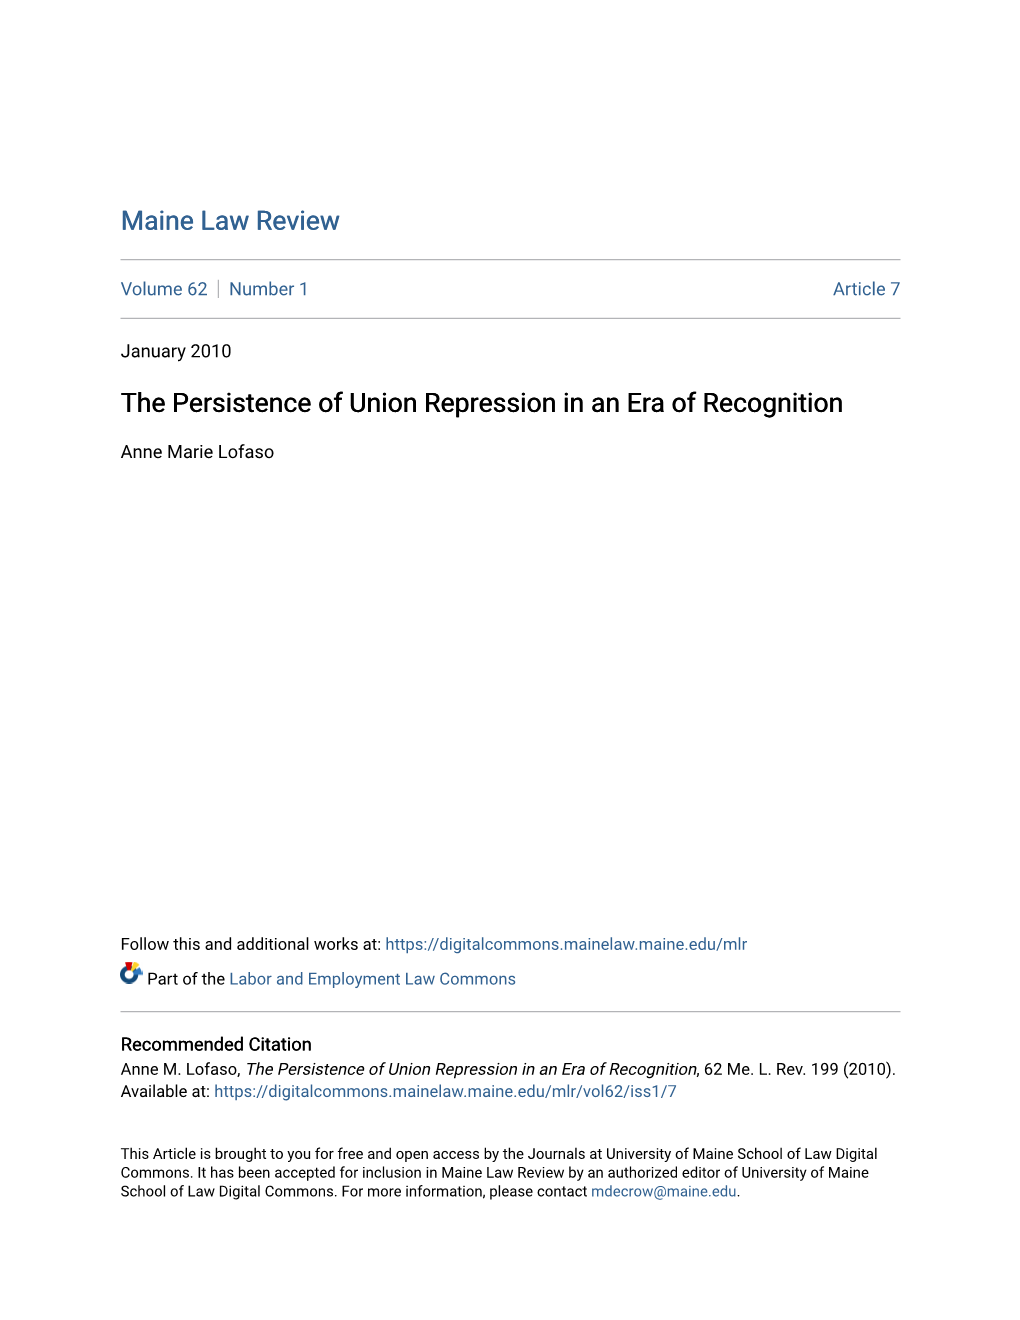 The Persistence of Union Repression in an Era of Recognition